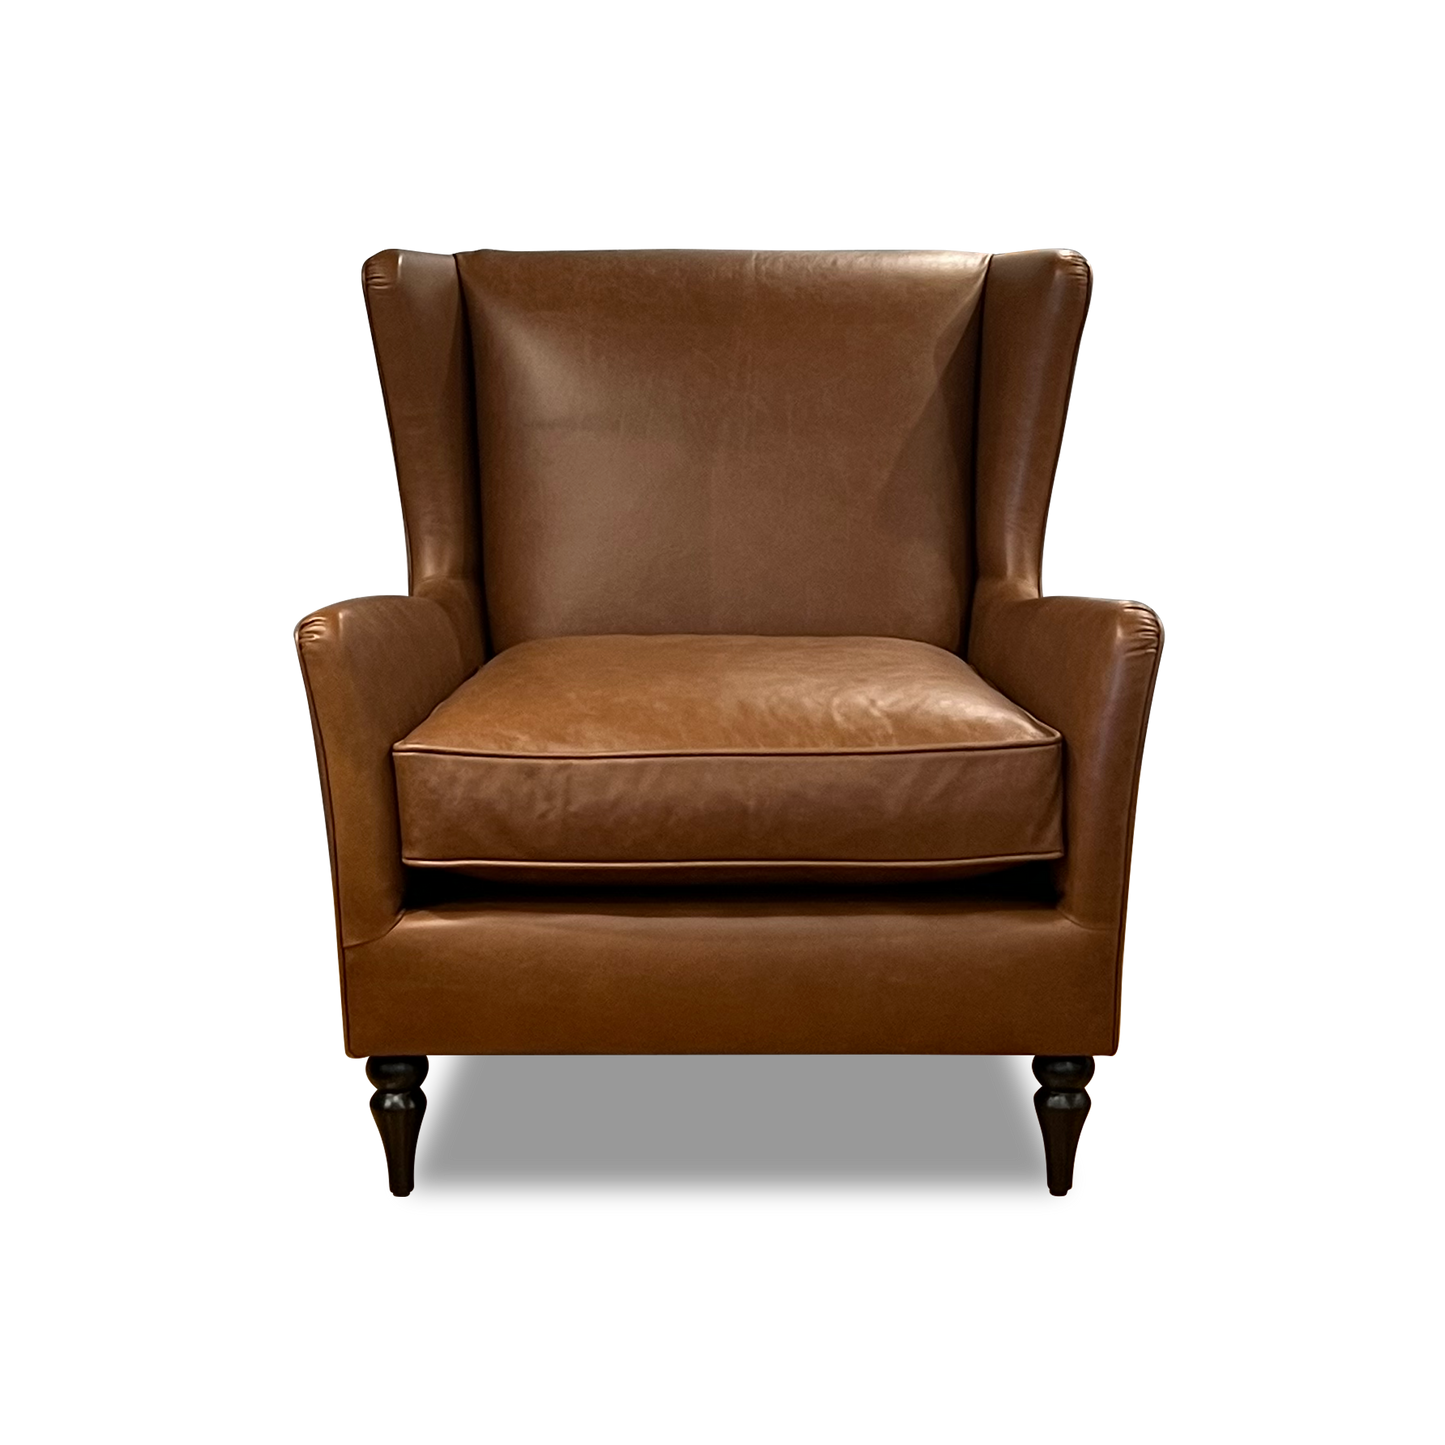 Hadleigh Wing Leather Occasional Chair by Molmic available from Make Your House A Home, Furniture Store located in Bendigo, Victoria. Australian Made in Melbourne.